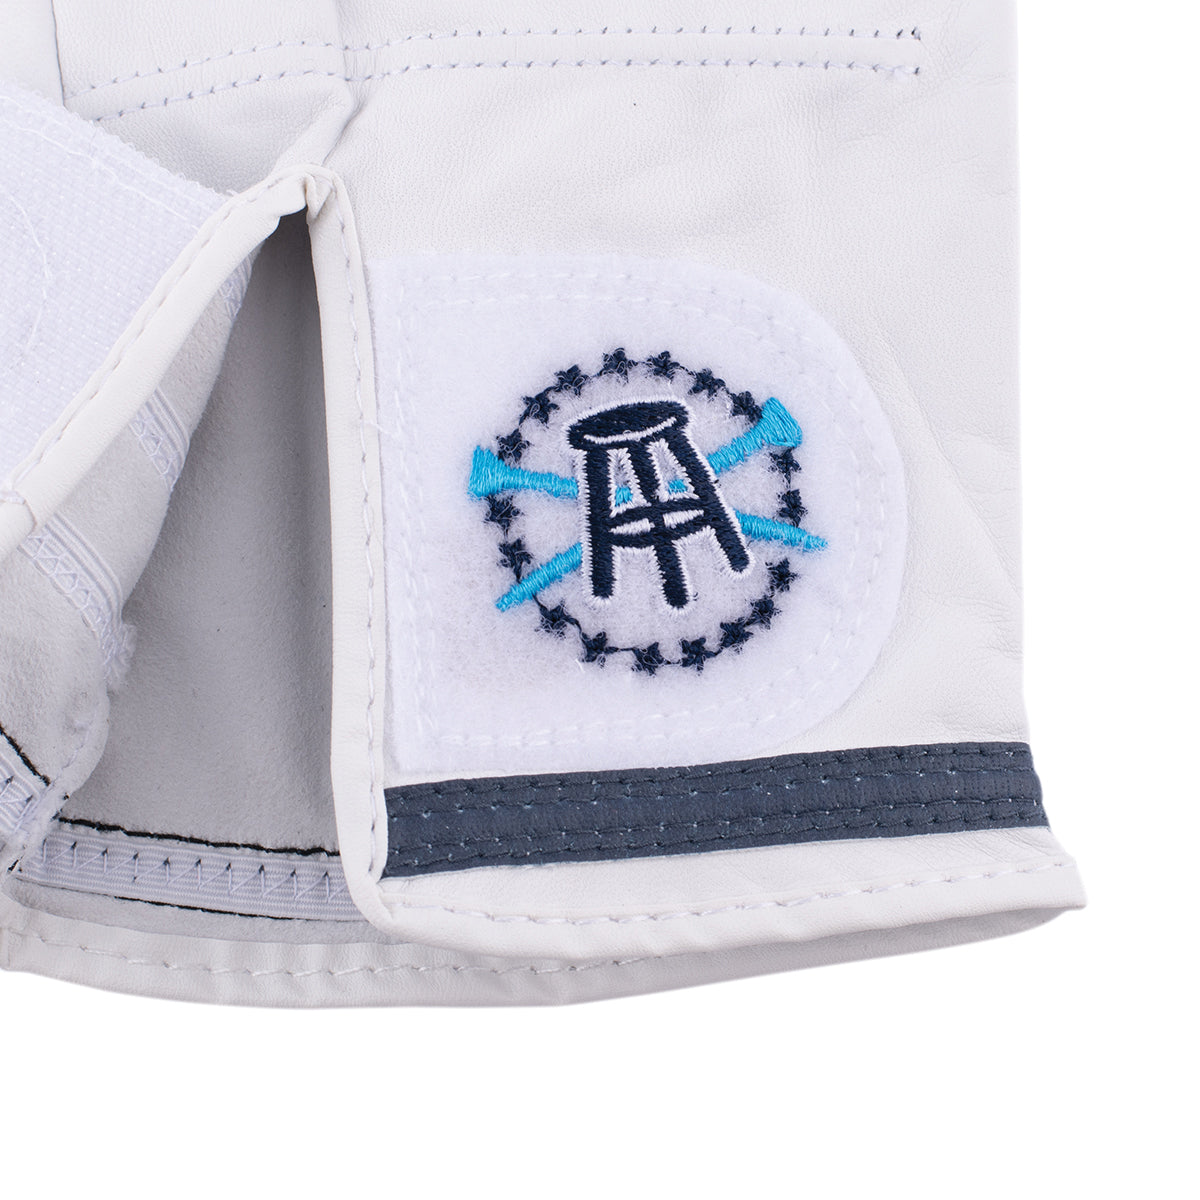 Barstool Golf Ain't No Hobby Golf Glove-Golf Accessories-Fore Play-Barstool Sports